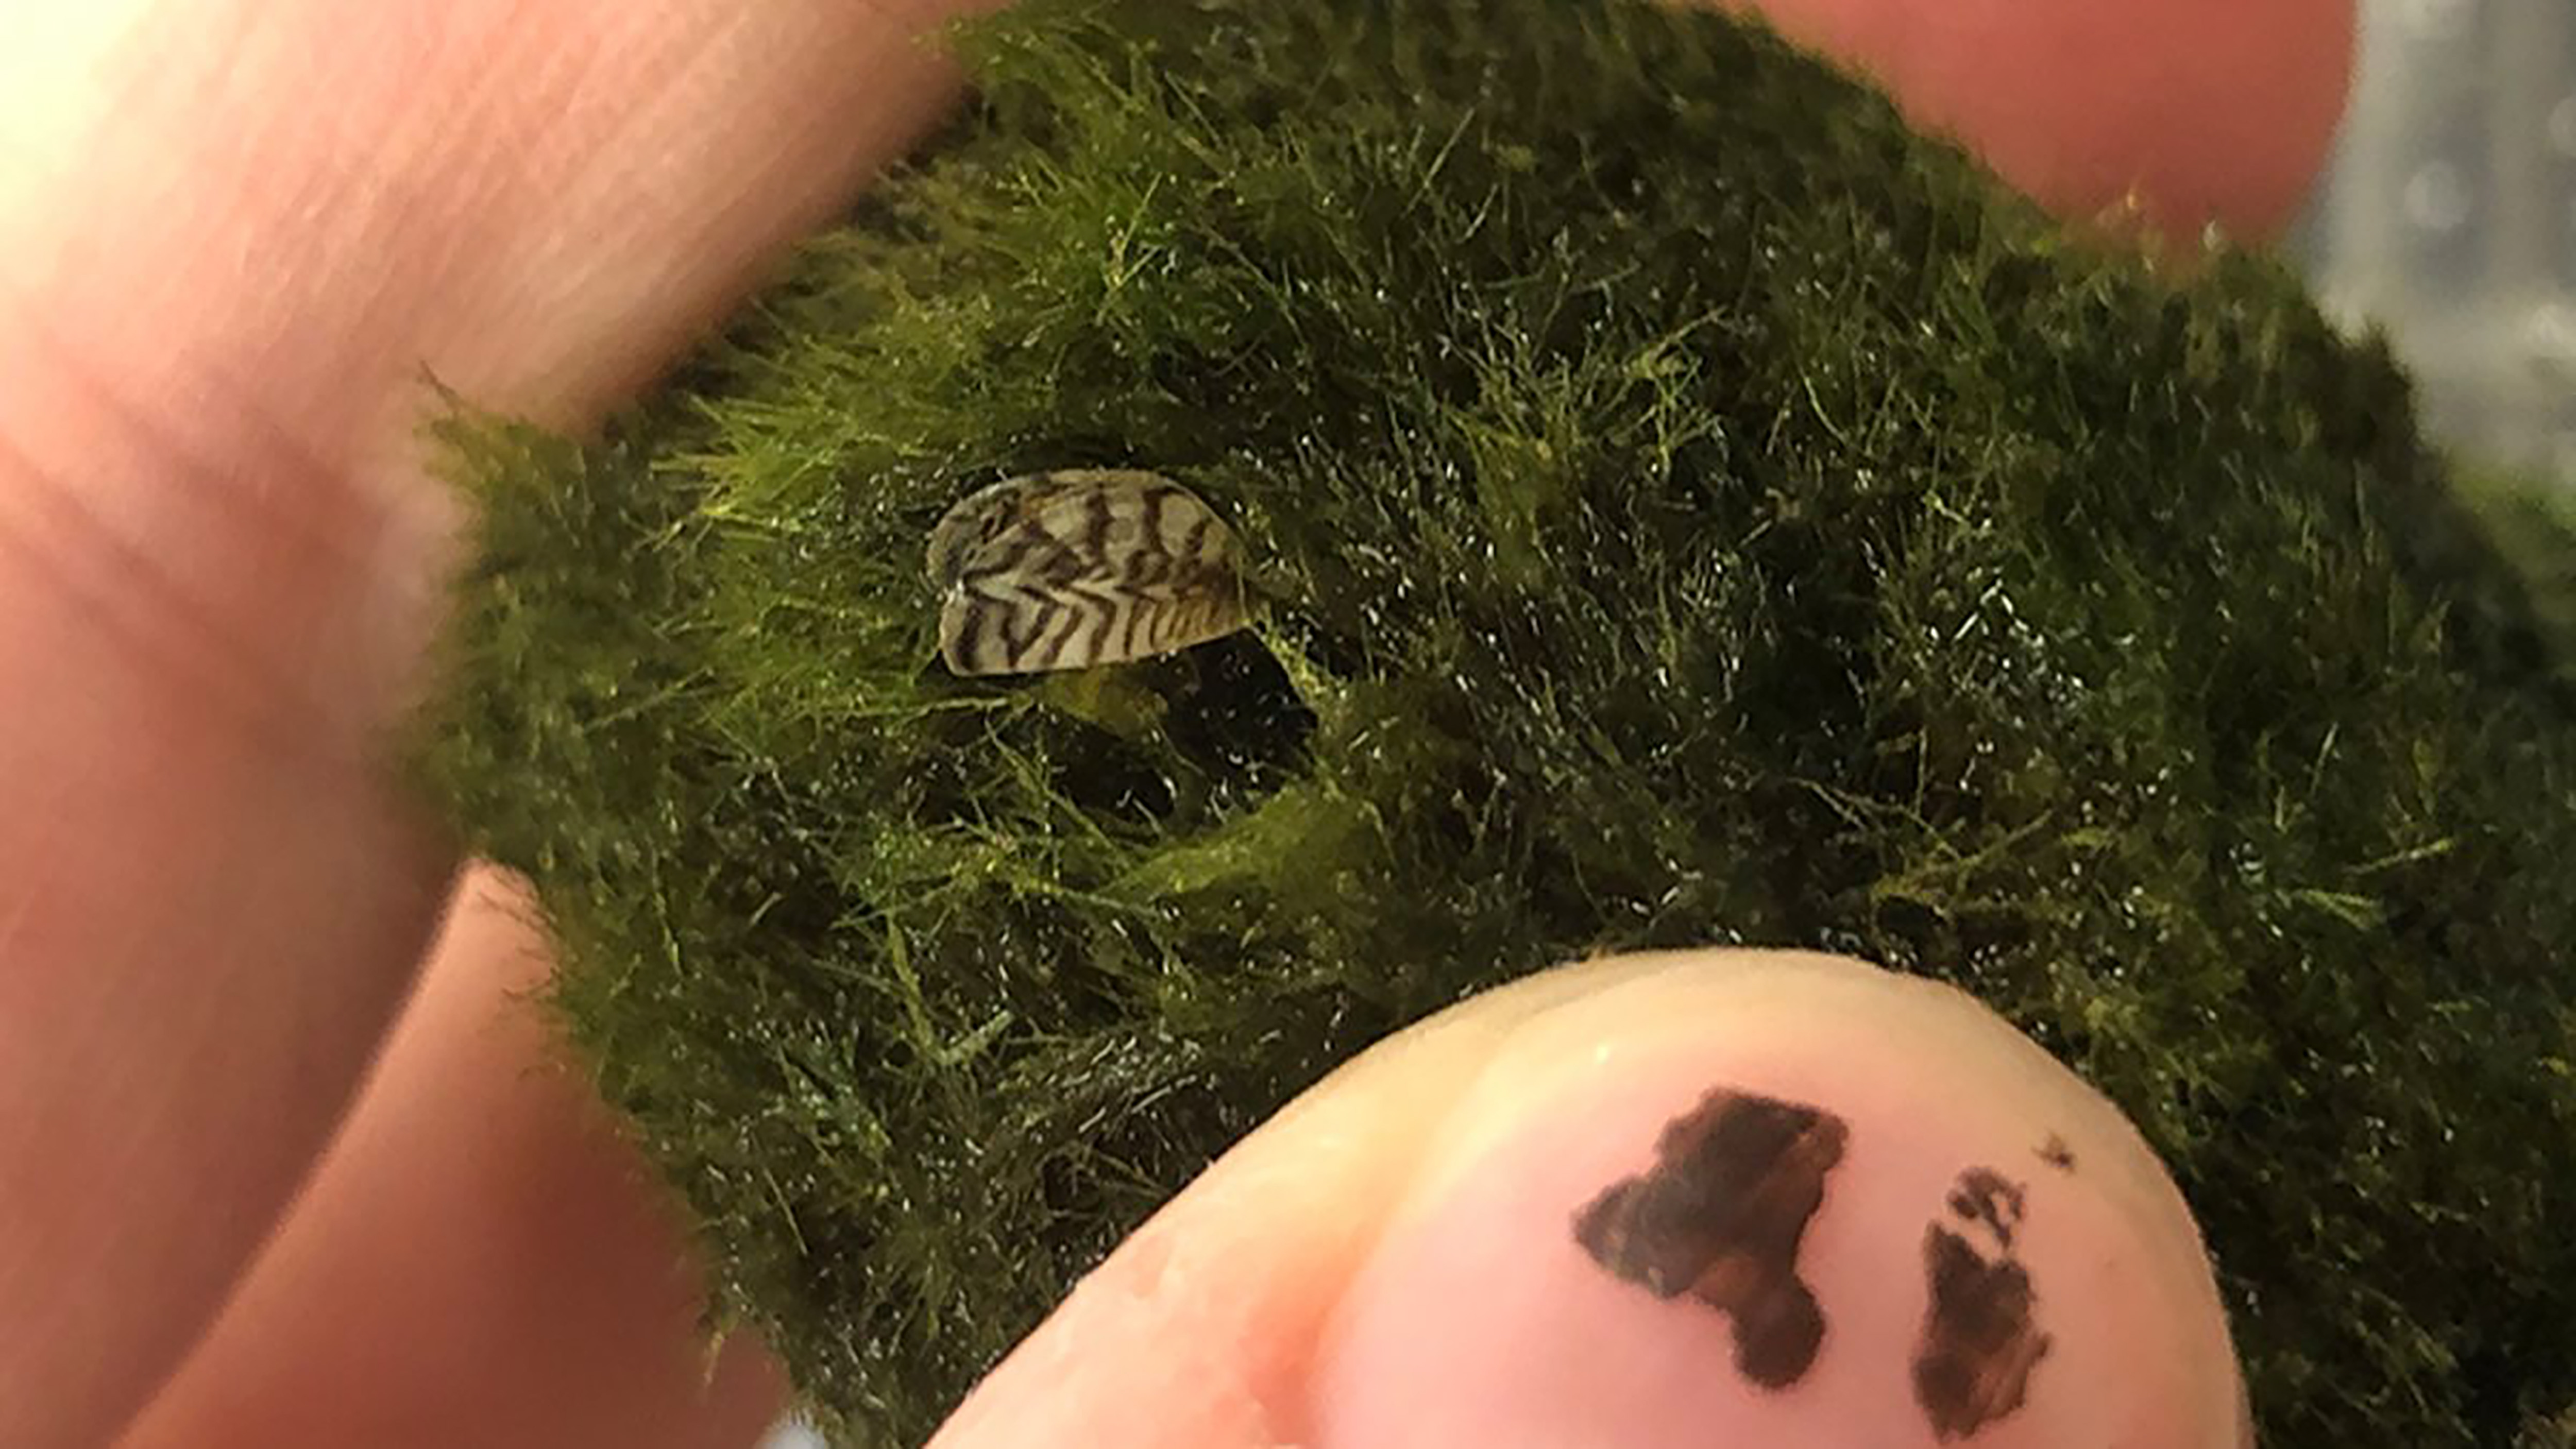 A moss ball sold in pest stores that contains an invasive zebra mussel (Image: USGS).